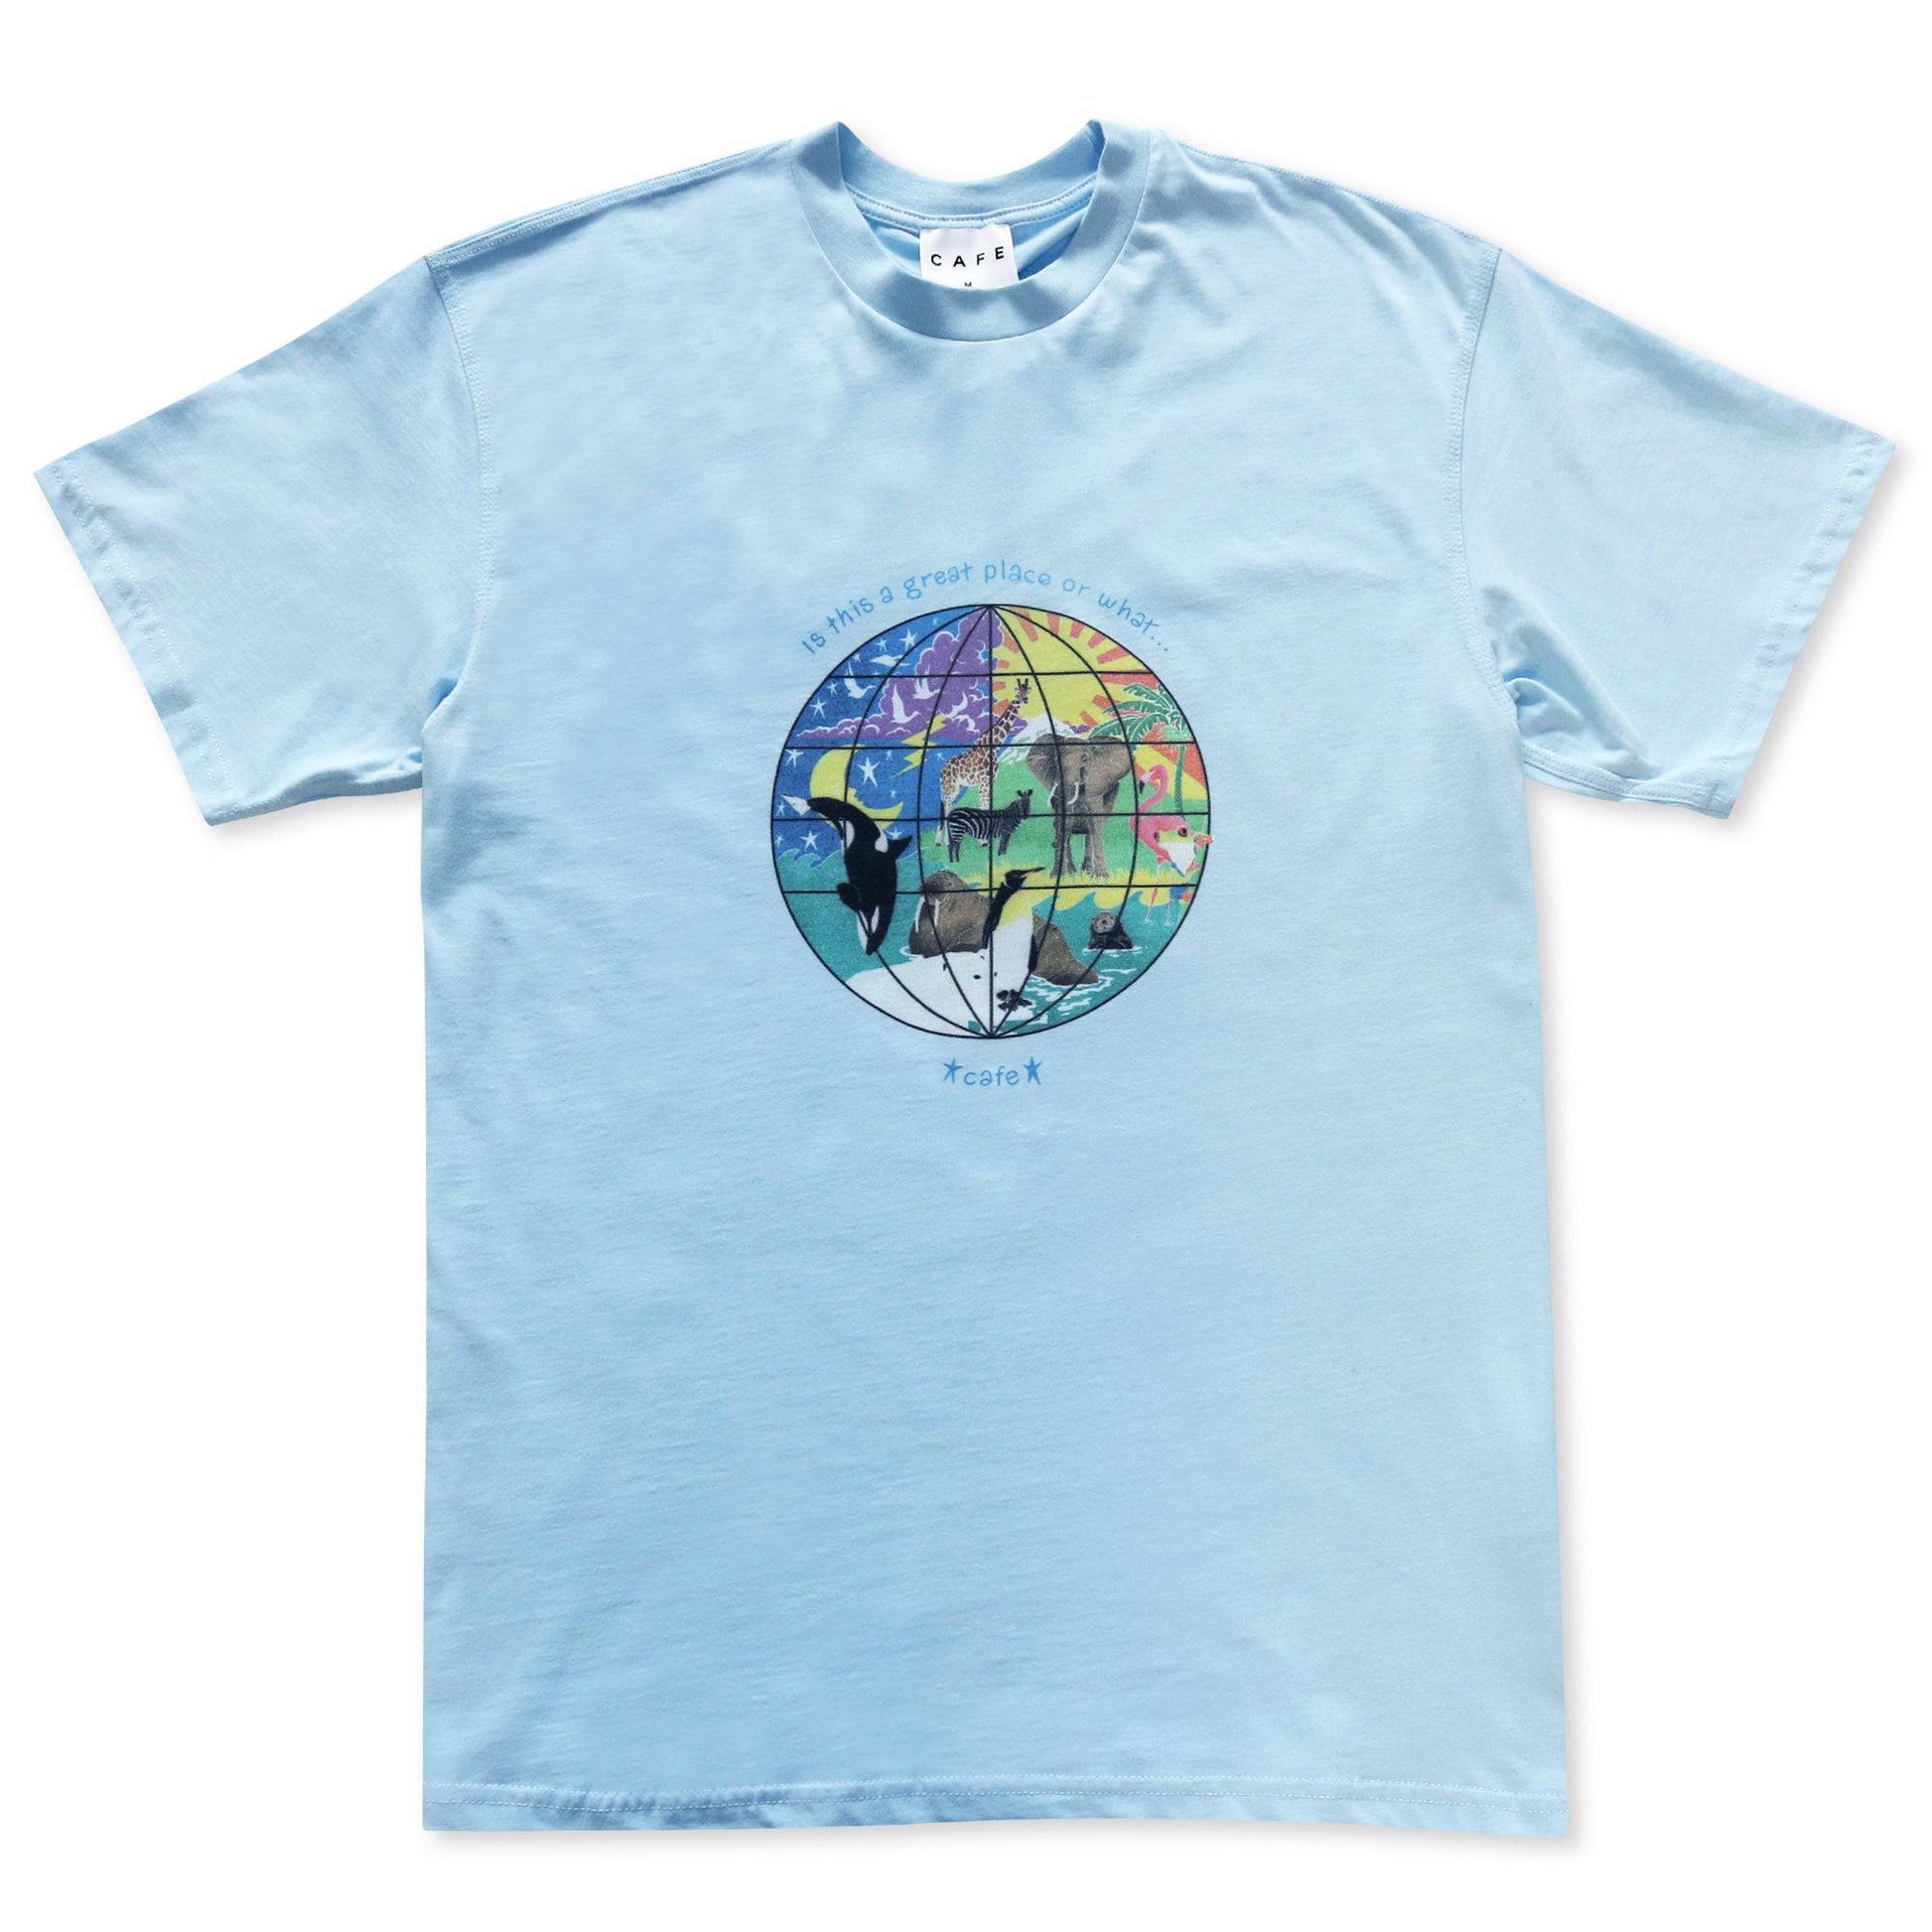 Skateboard Cafe Skateboard Cafe Great Place T-Shirt | Baby Blue Tees | The Vines